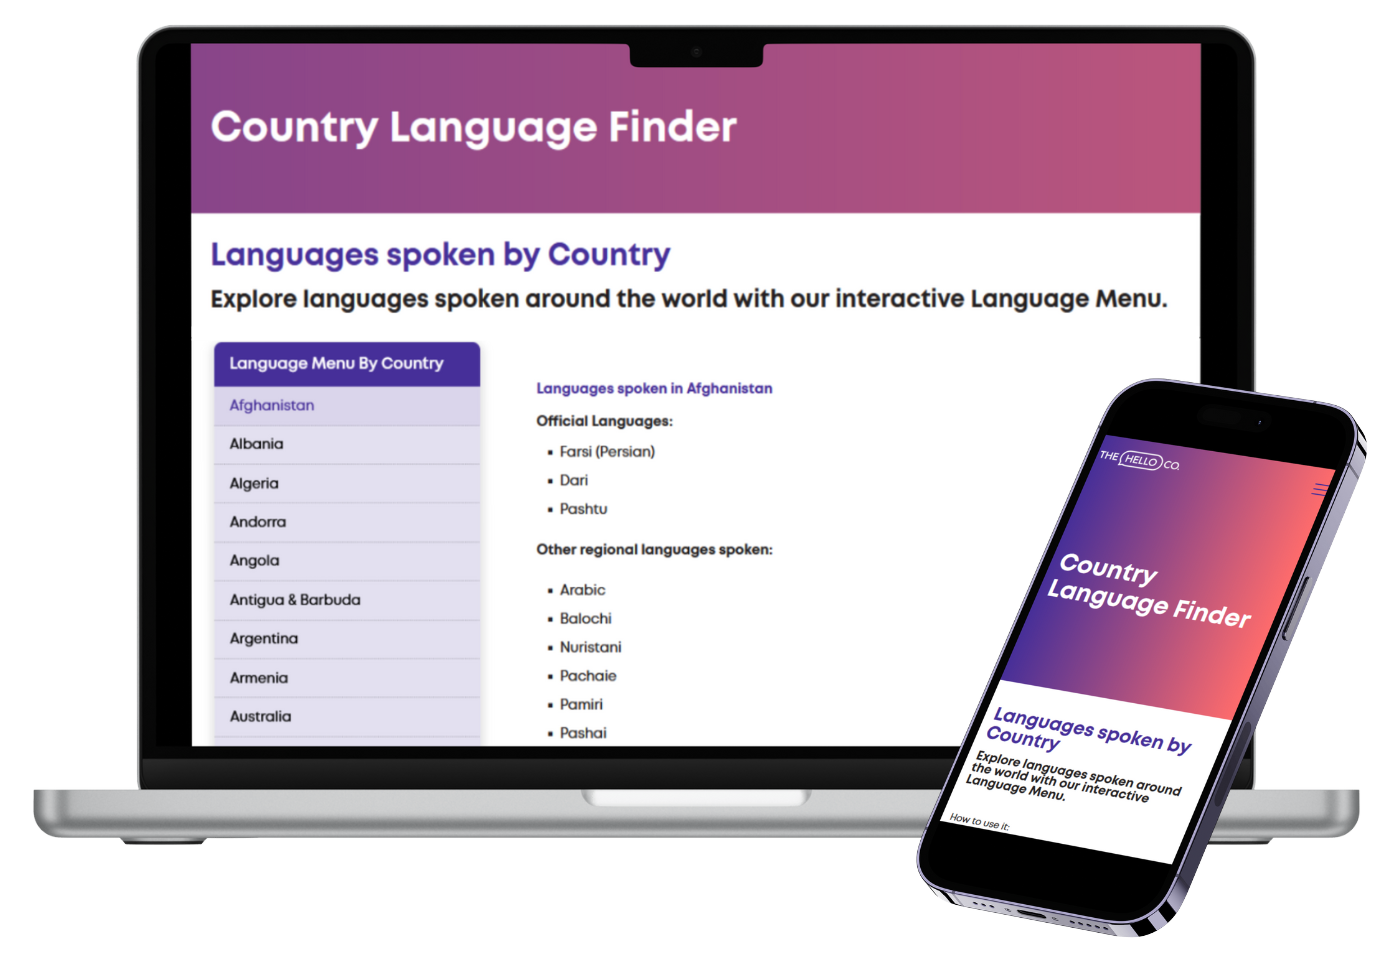 The Hello Co. Country Language Finder